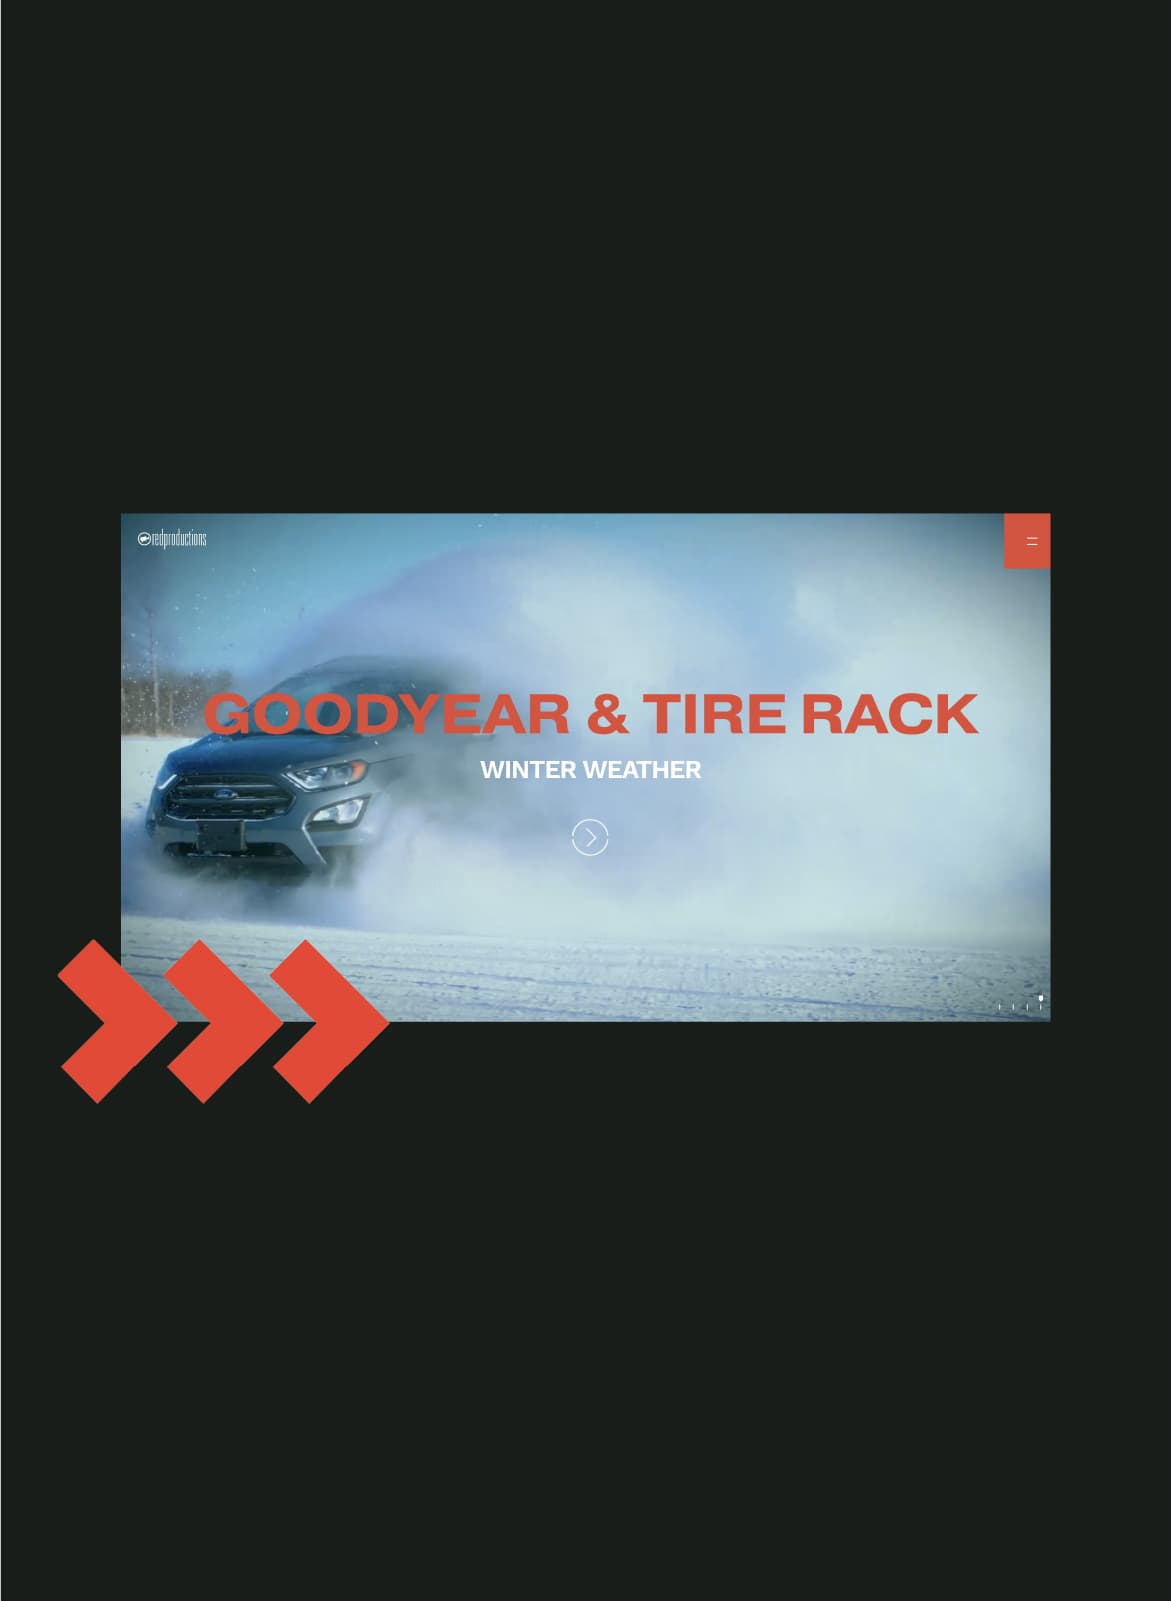 Red Productions website design screenshot of goodyear & tire rack video